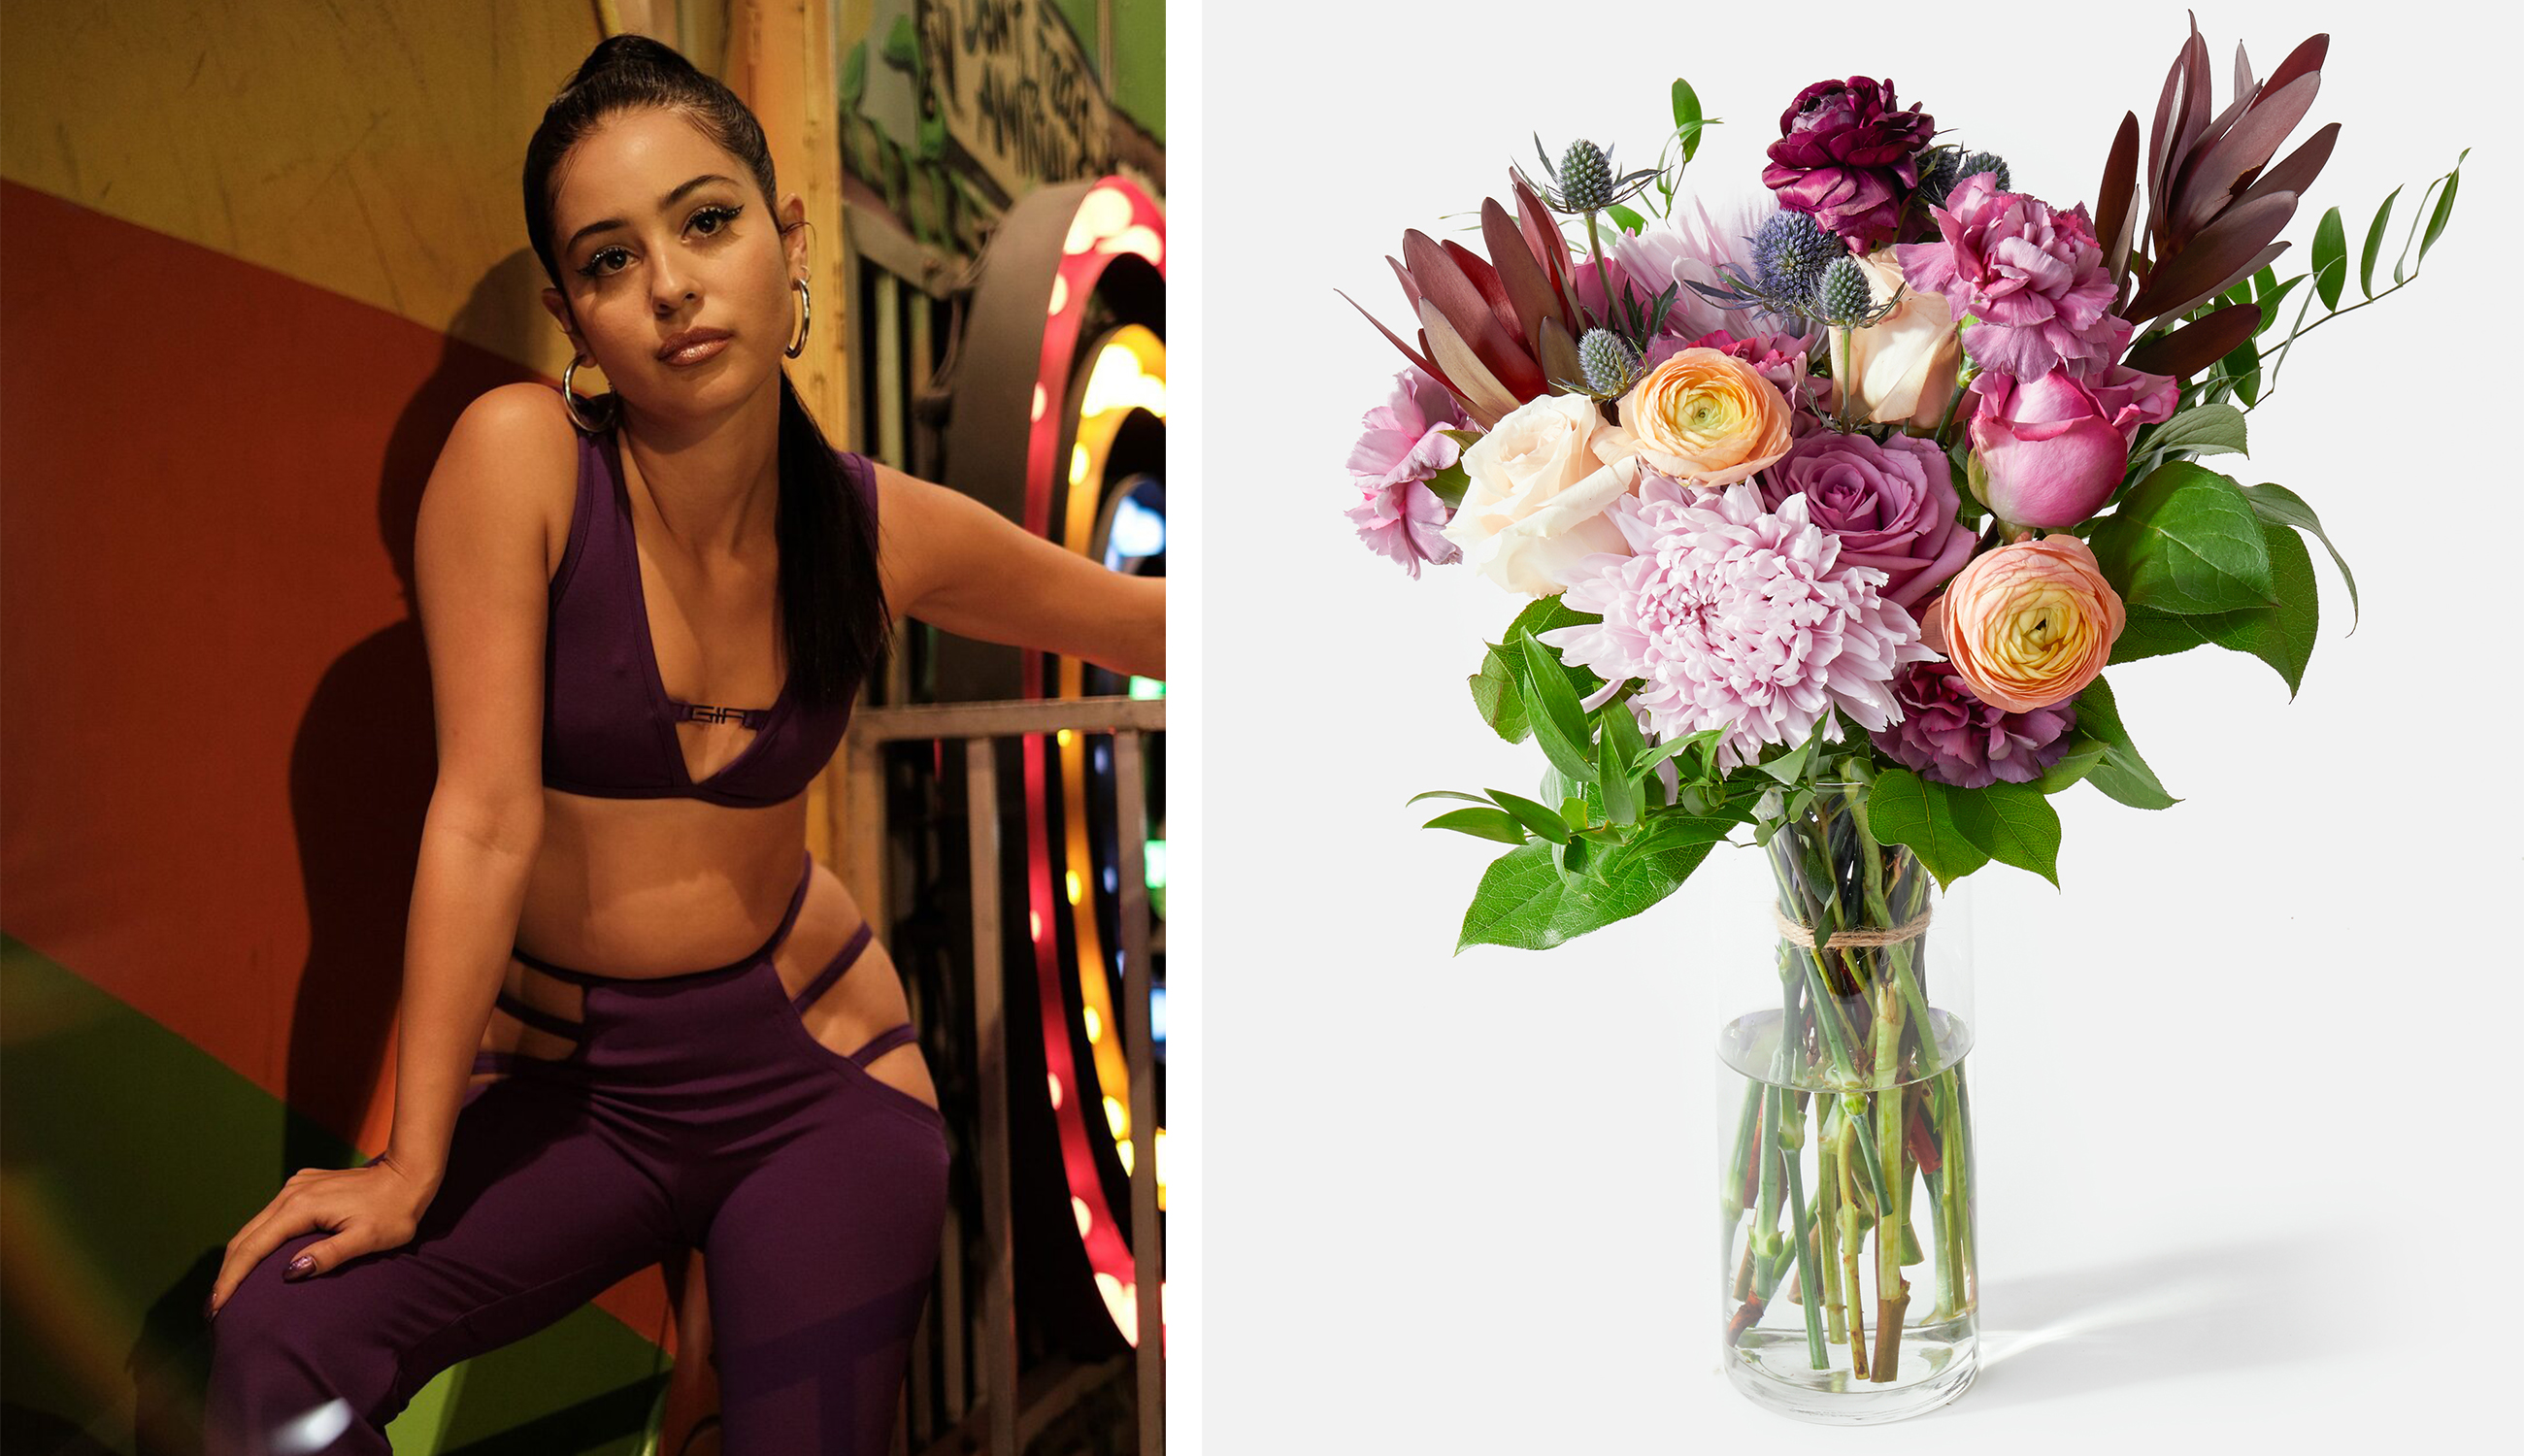 Maddy from Euphoria side by side with a purple flower bouquet